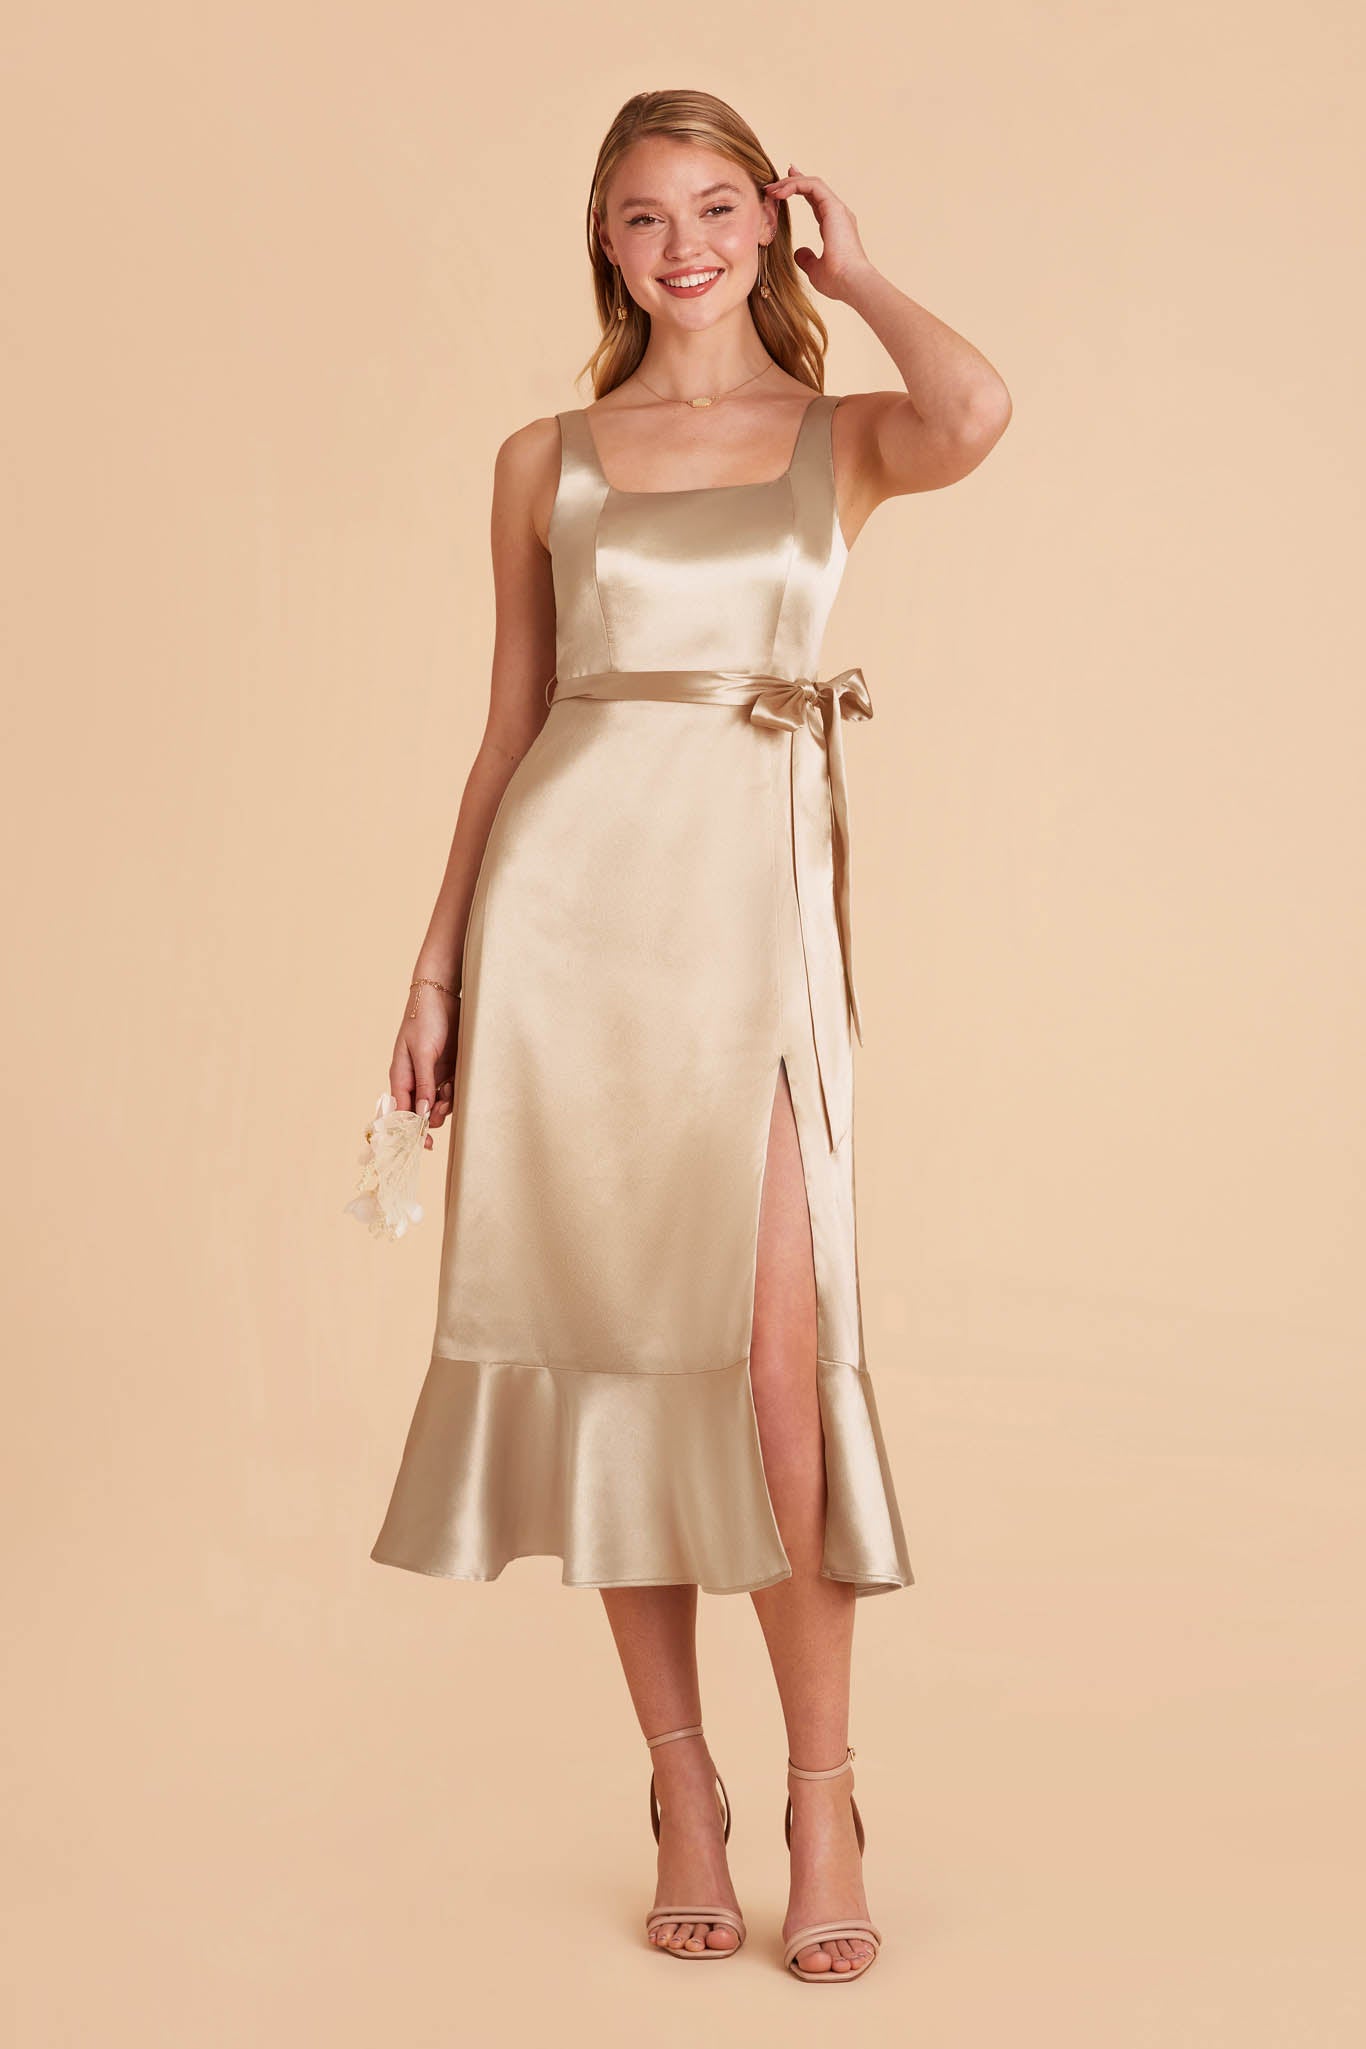 Neutral Champagne Eugenia Convertible Midi Dress by Birdy Grey